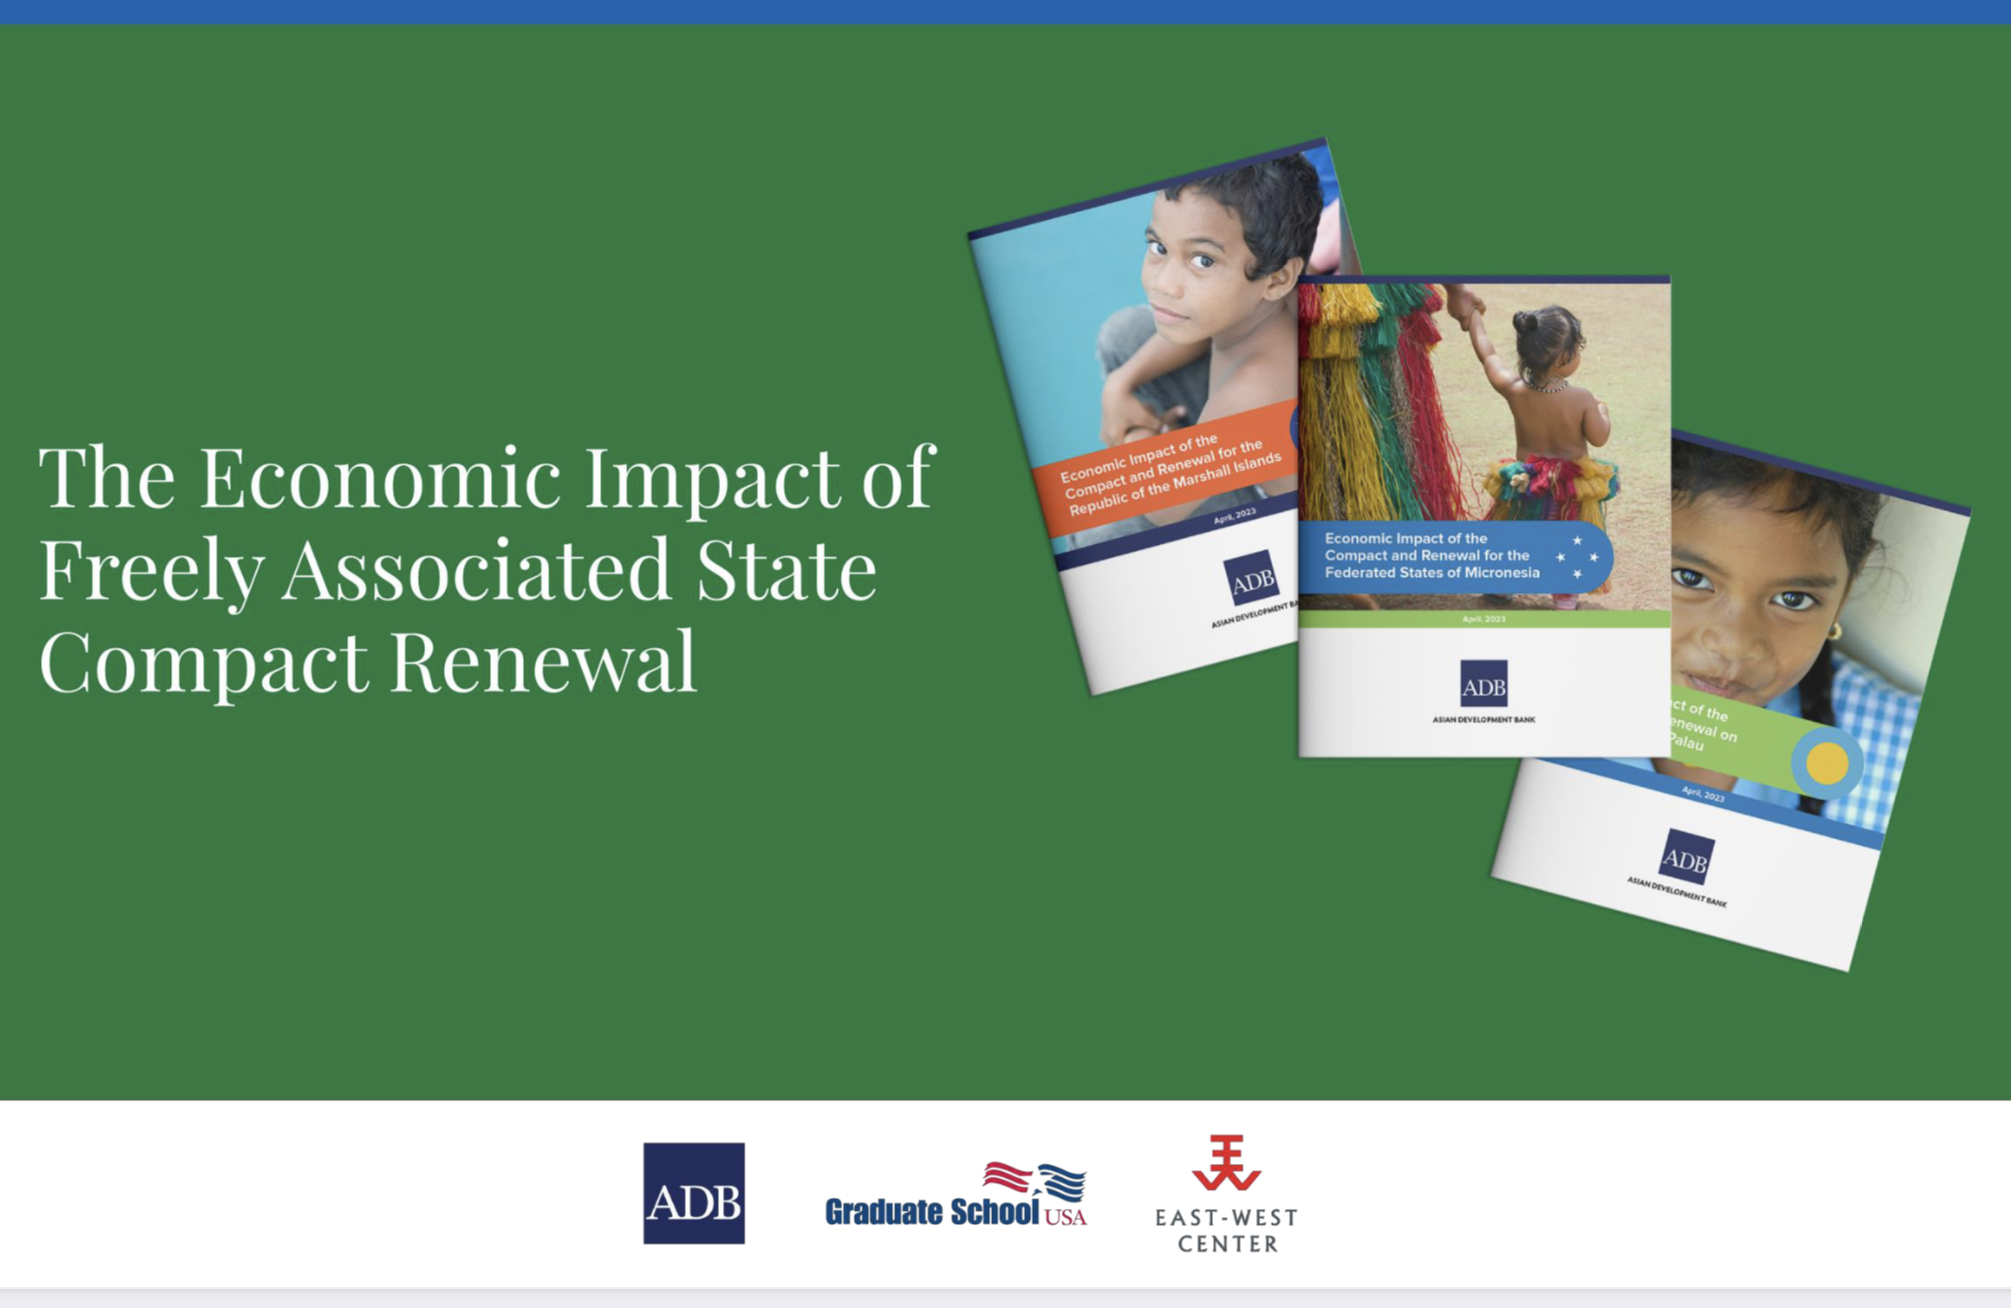 Related Document thumbnail of Slides: The Economic Impact of Compact Renewal on the Freely Associated States